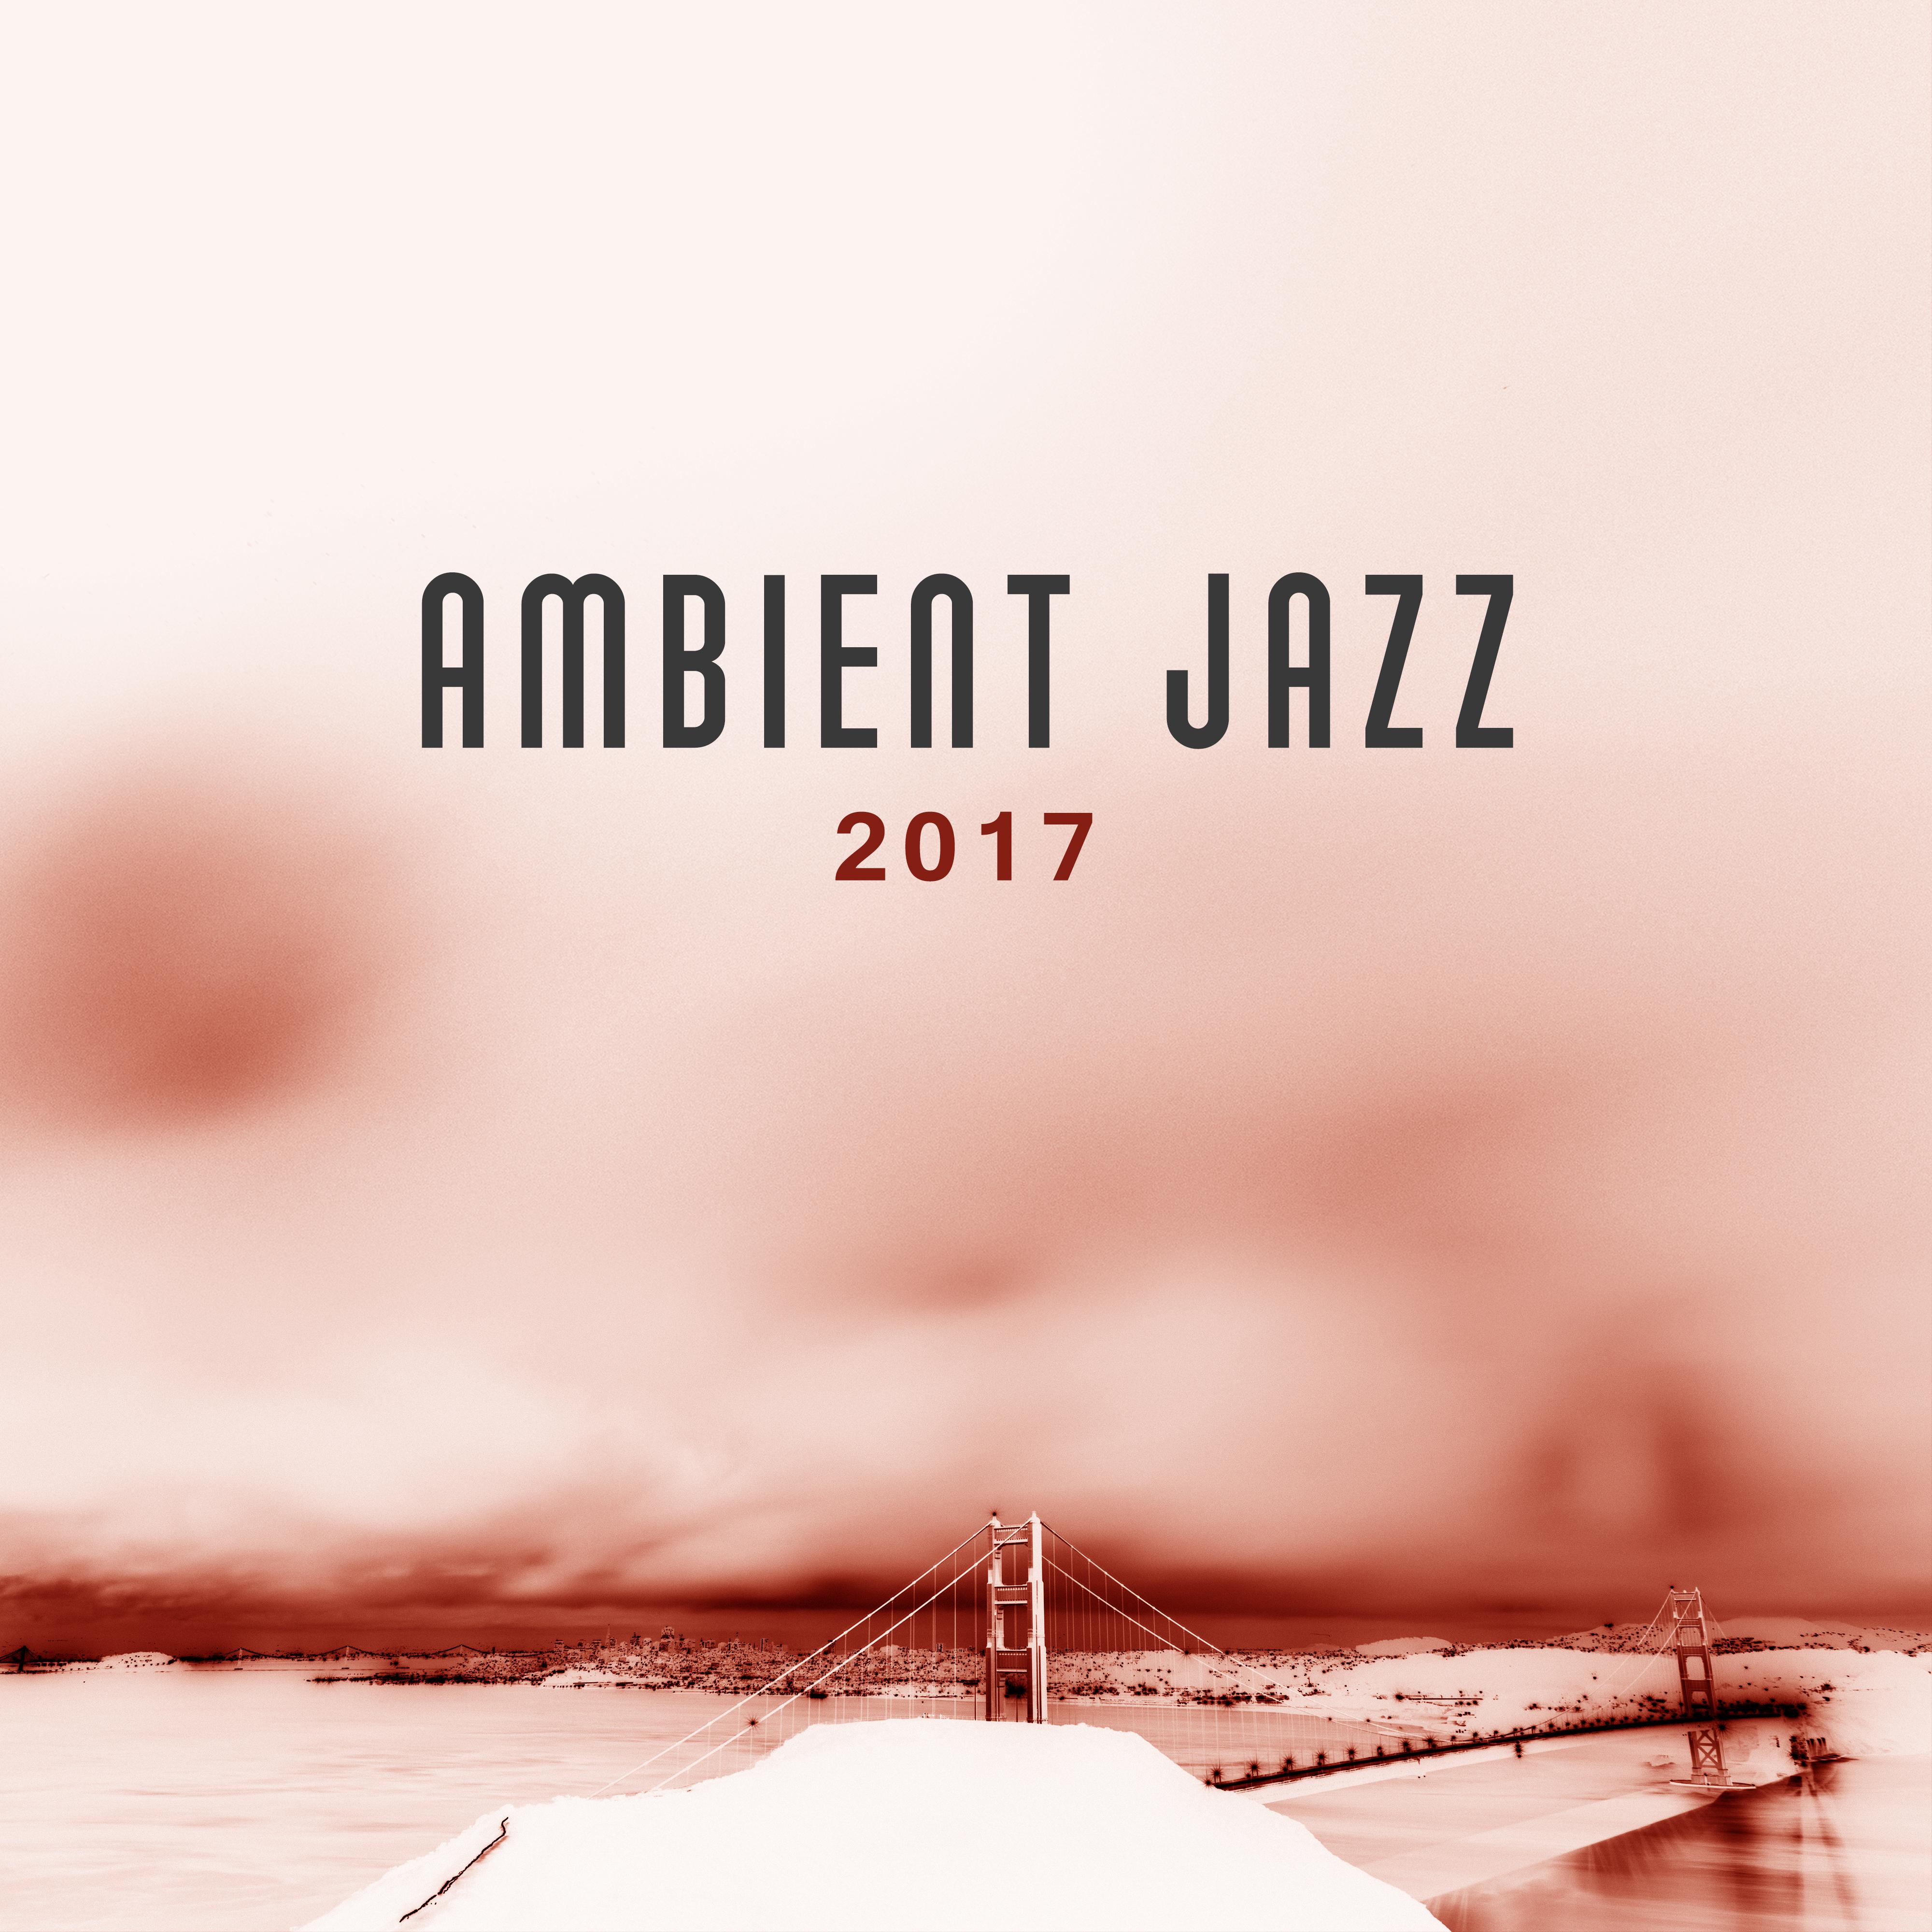 Ambient Jazz 2017 – Smooth Jazz, Instrumental Music, Relaxed Piano